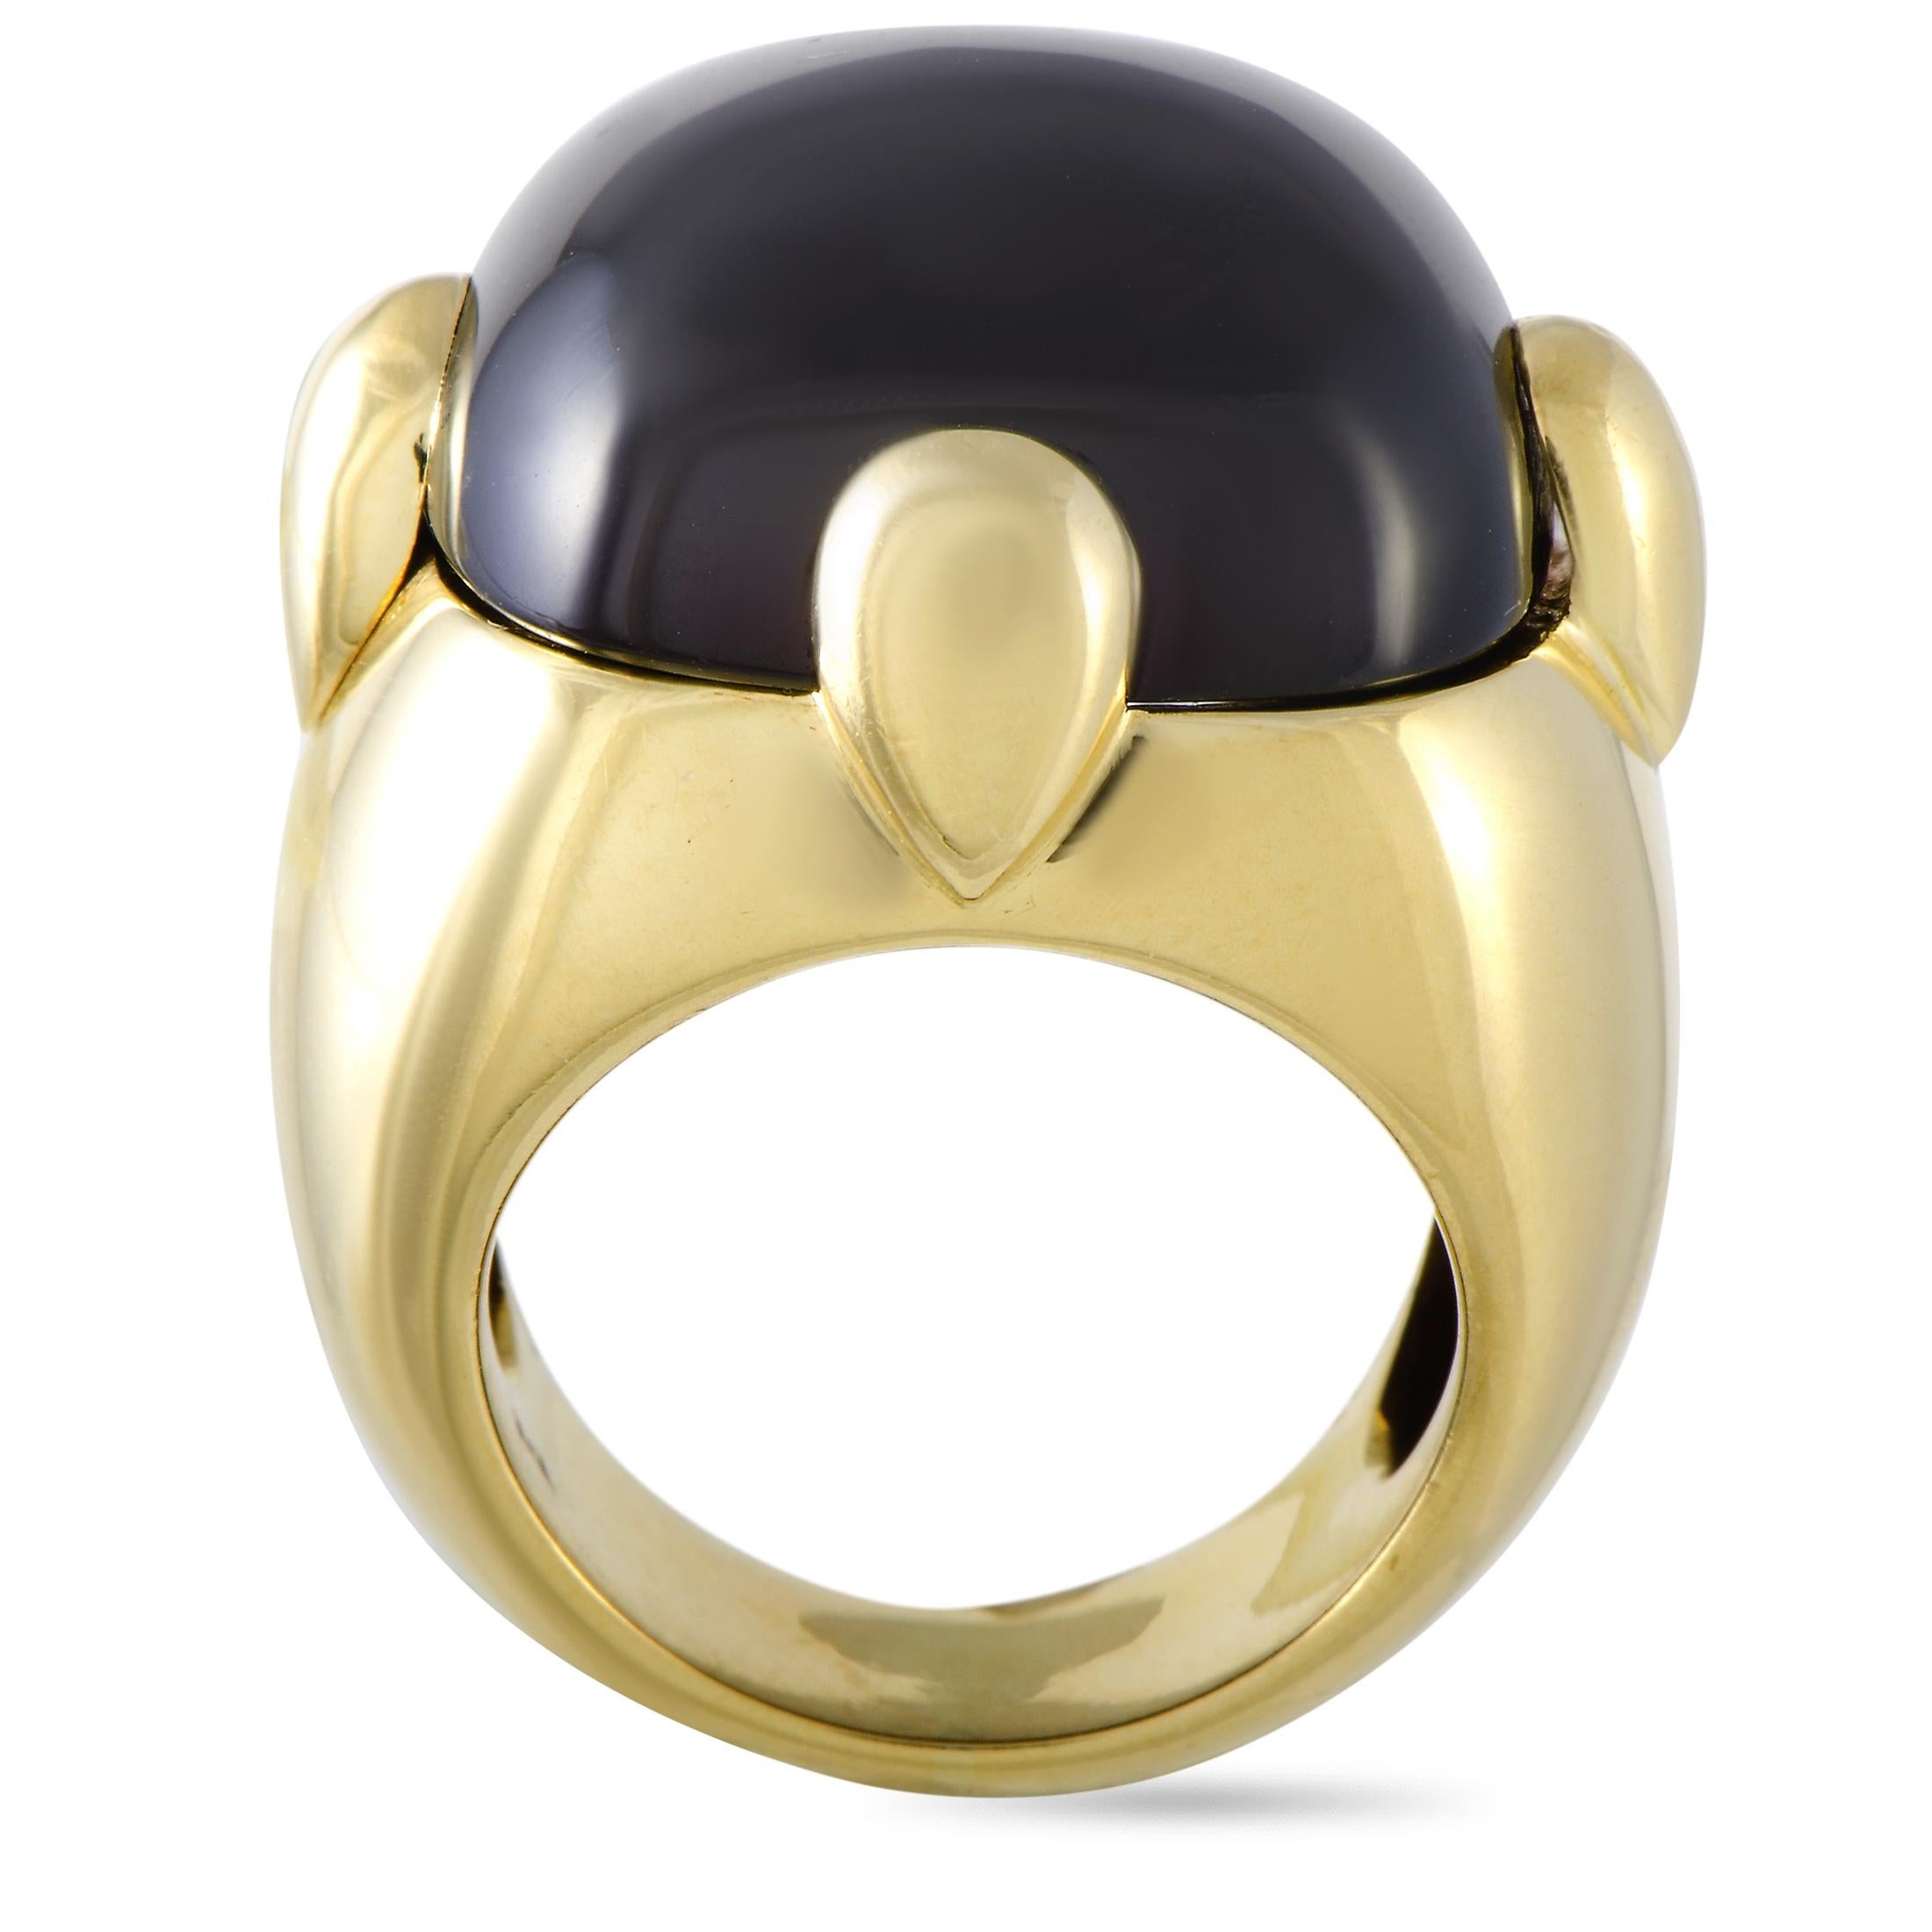 This Pomellato ring is crafted from 18K yellow gold and set with a garnet. The ring weighs 26.8 grams, boasting band thickness of 16 mm and top height of 13 mm, while top dimensions measure 25 by 23 mm.
Ring Size: 6

Offered in estate condition,